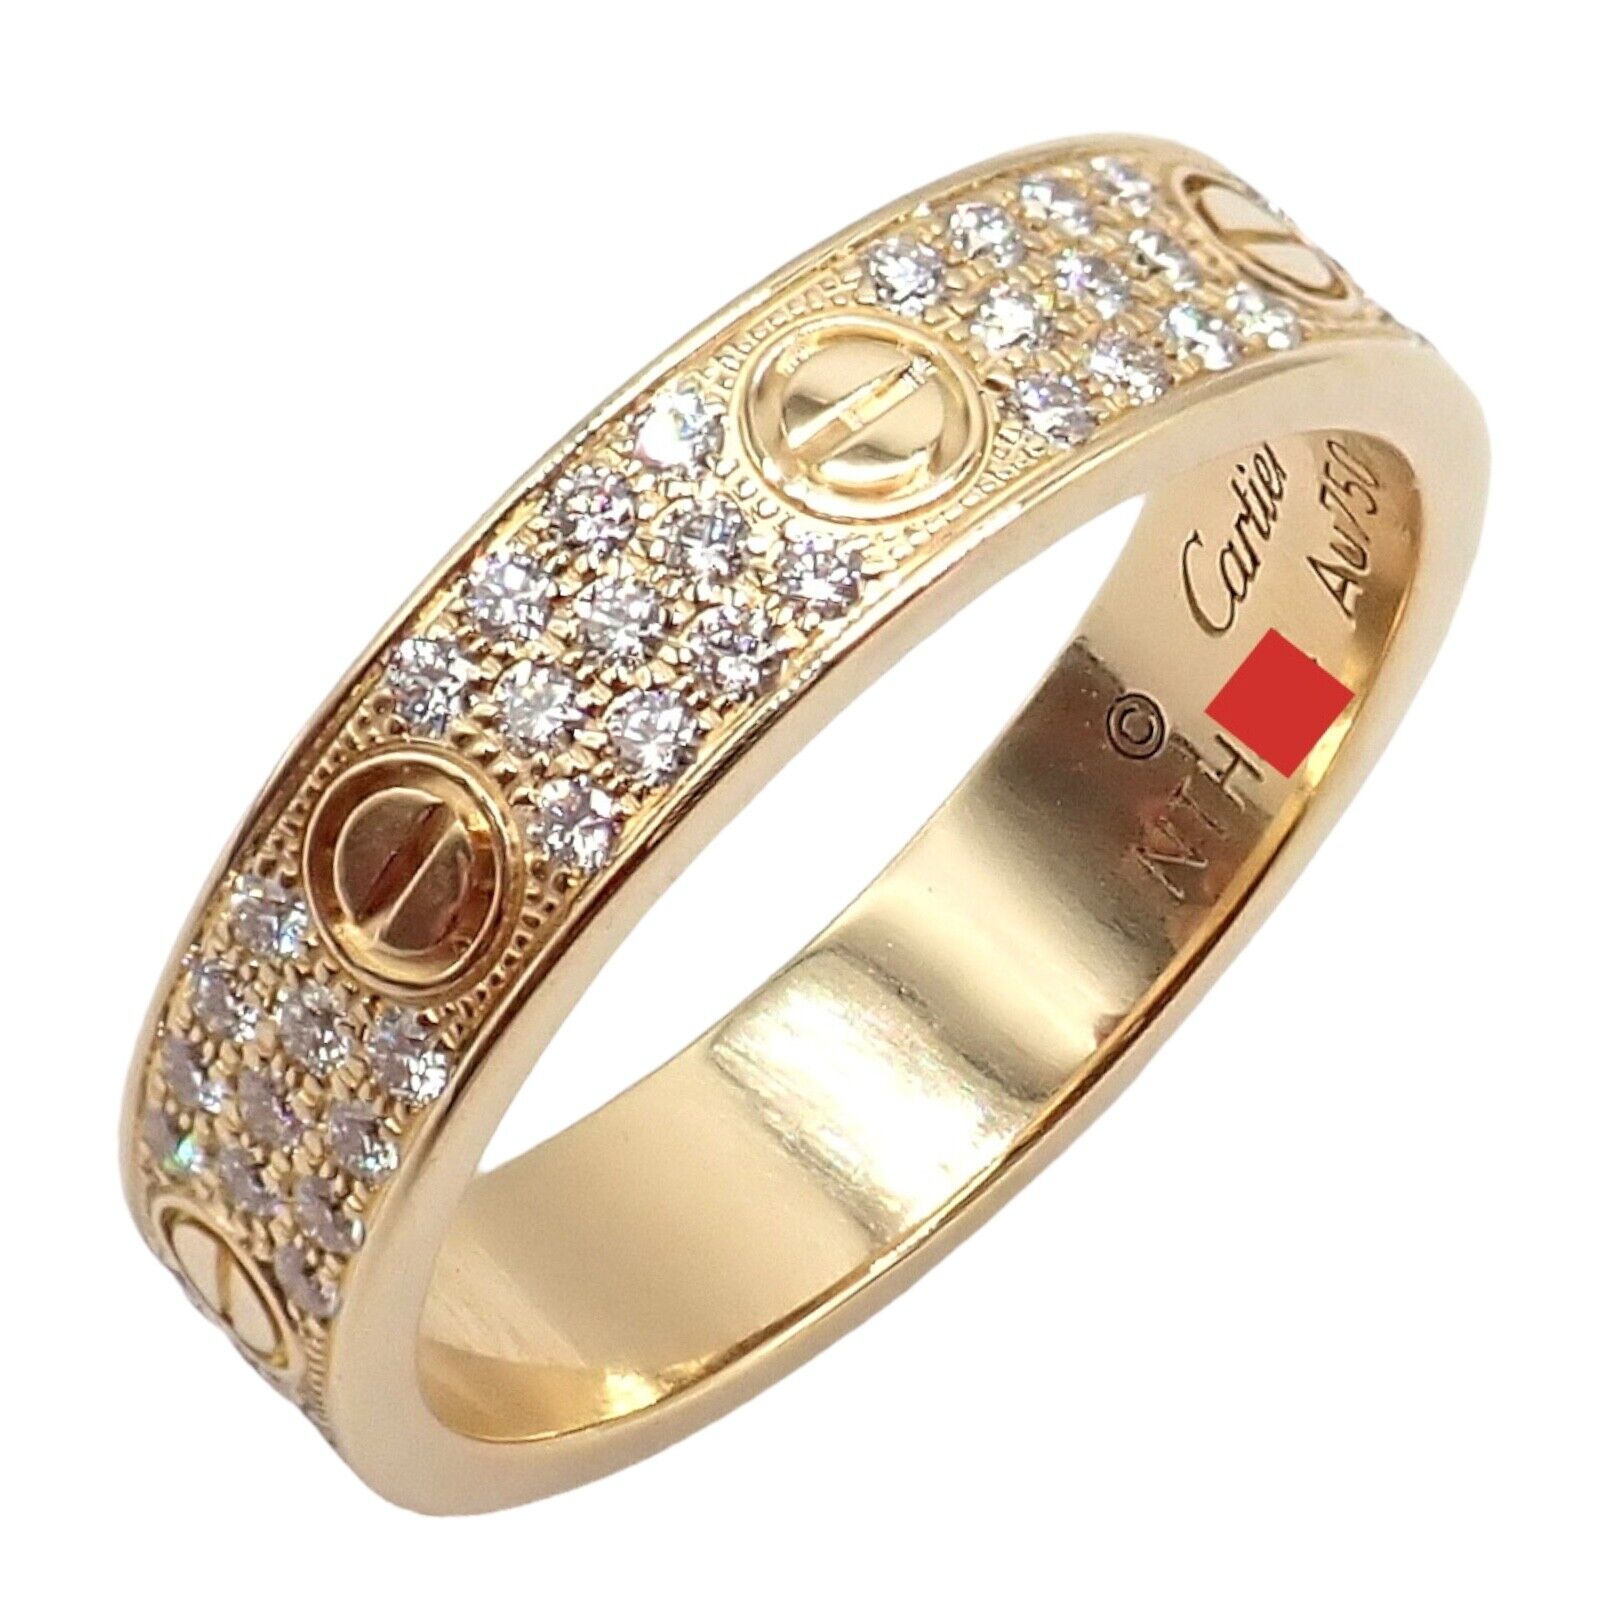 Cartier Jewelry & Watches:Fine Jewelry:Rings Authentic! Cartier Love 18k Yellow Gold Diamond Paved Ring sz 7.25 55